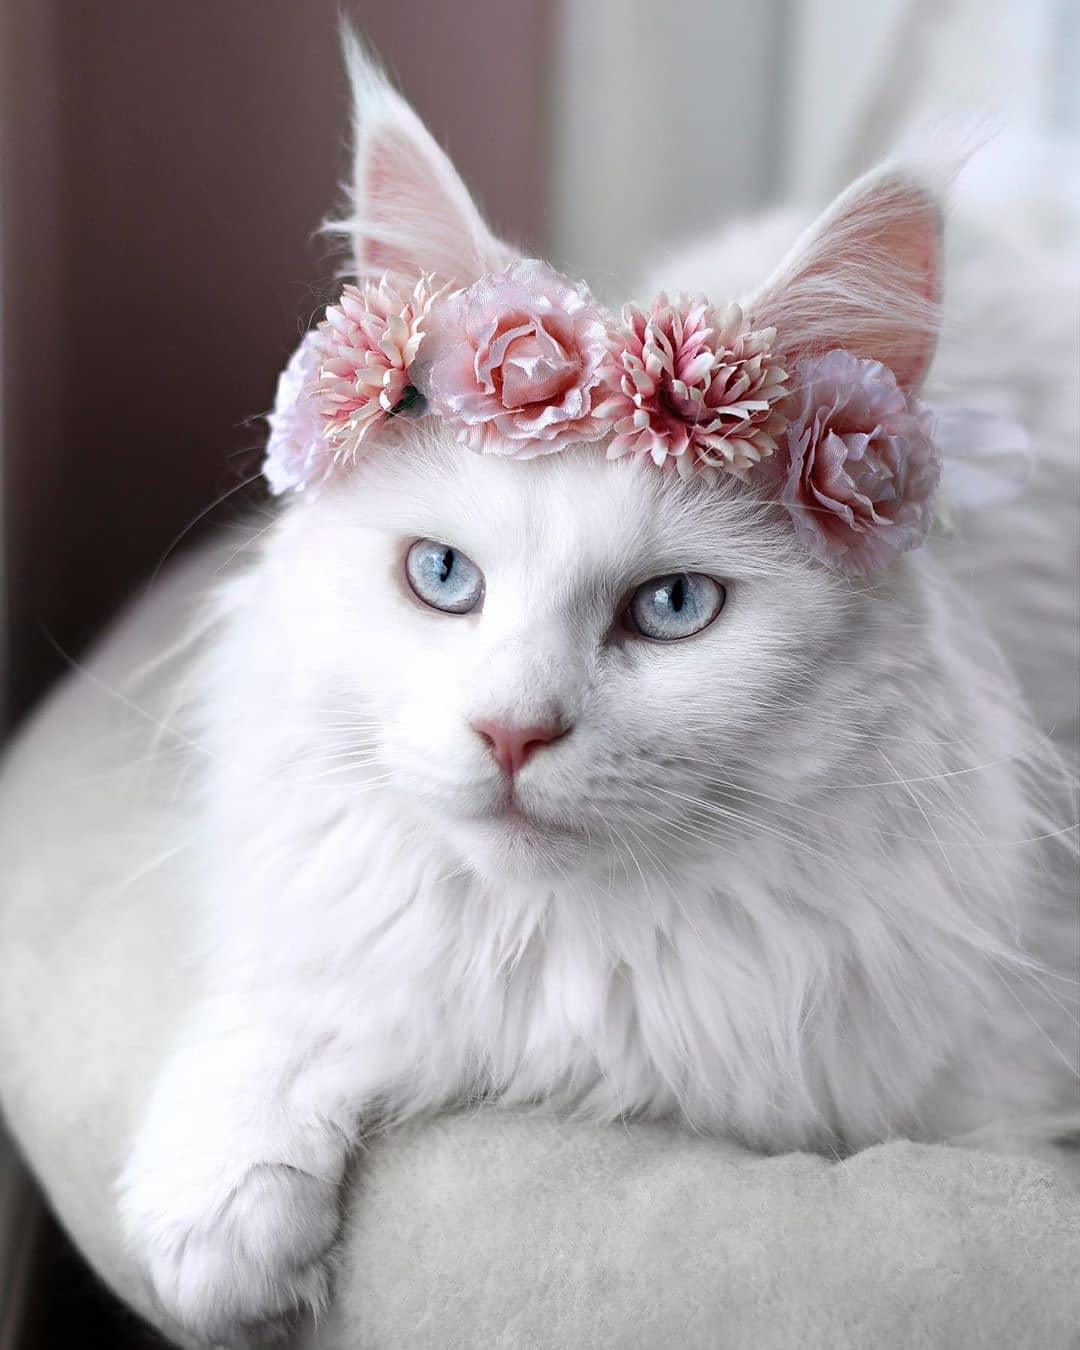 white Maine Coon Cat with blue eyes wearing pink flower crown resting on its bed